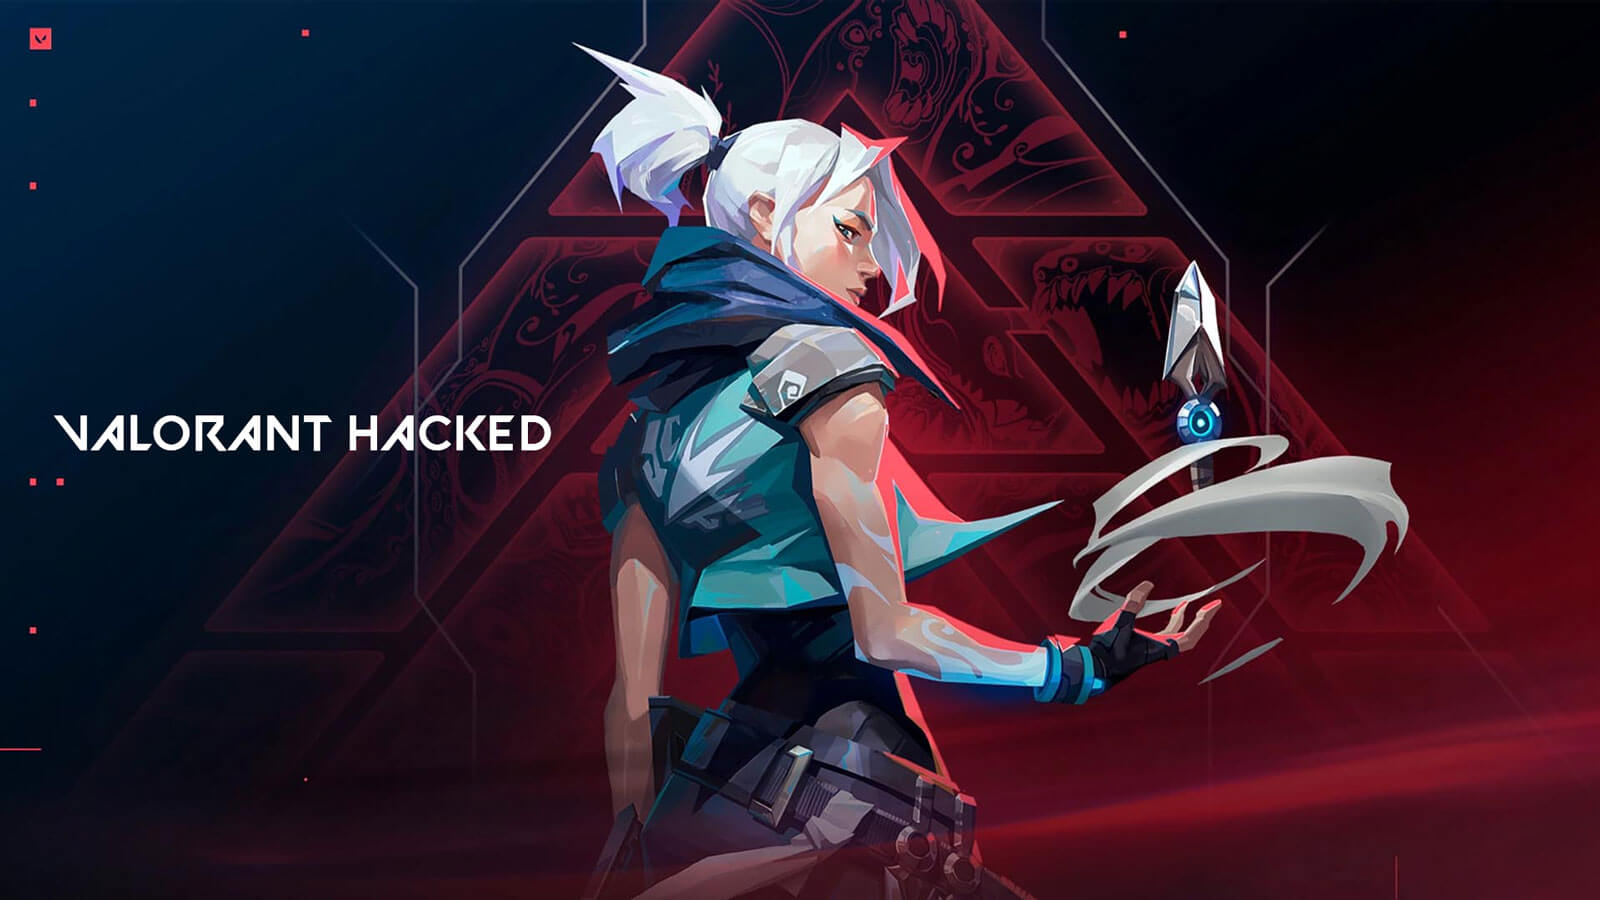 Riot Games hacked, Valorant, and other games affected